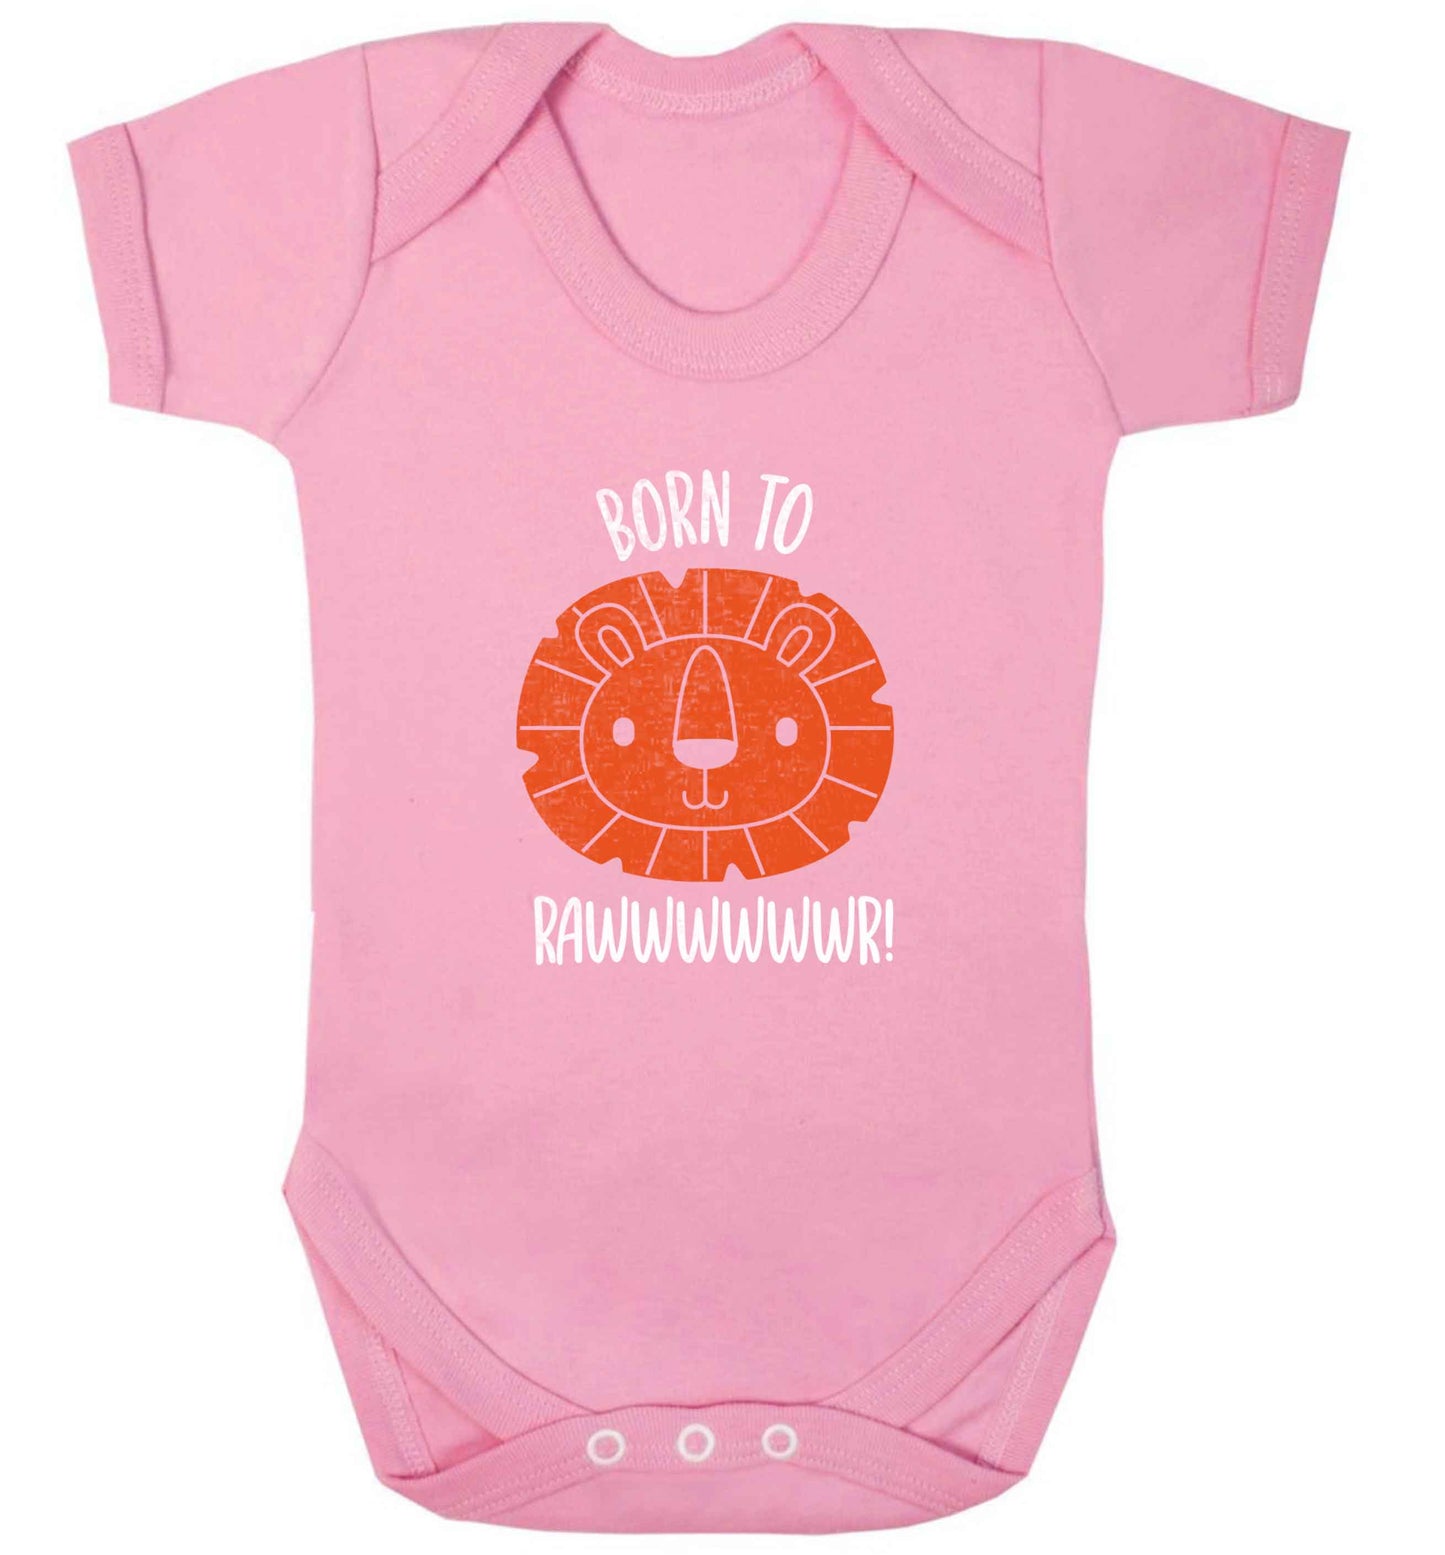 Born to rawr baby vest pale pink 18-24 months